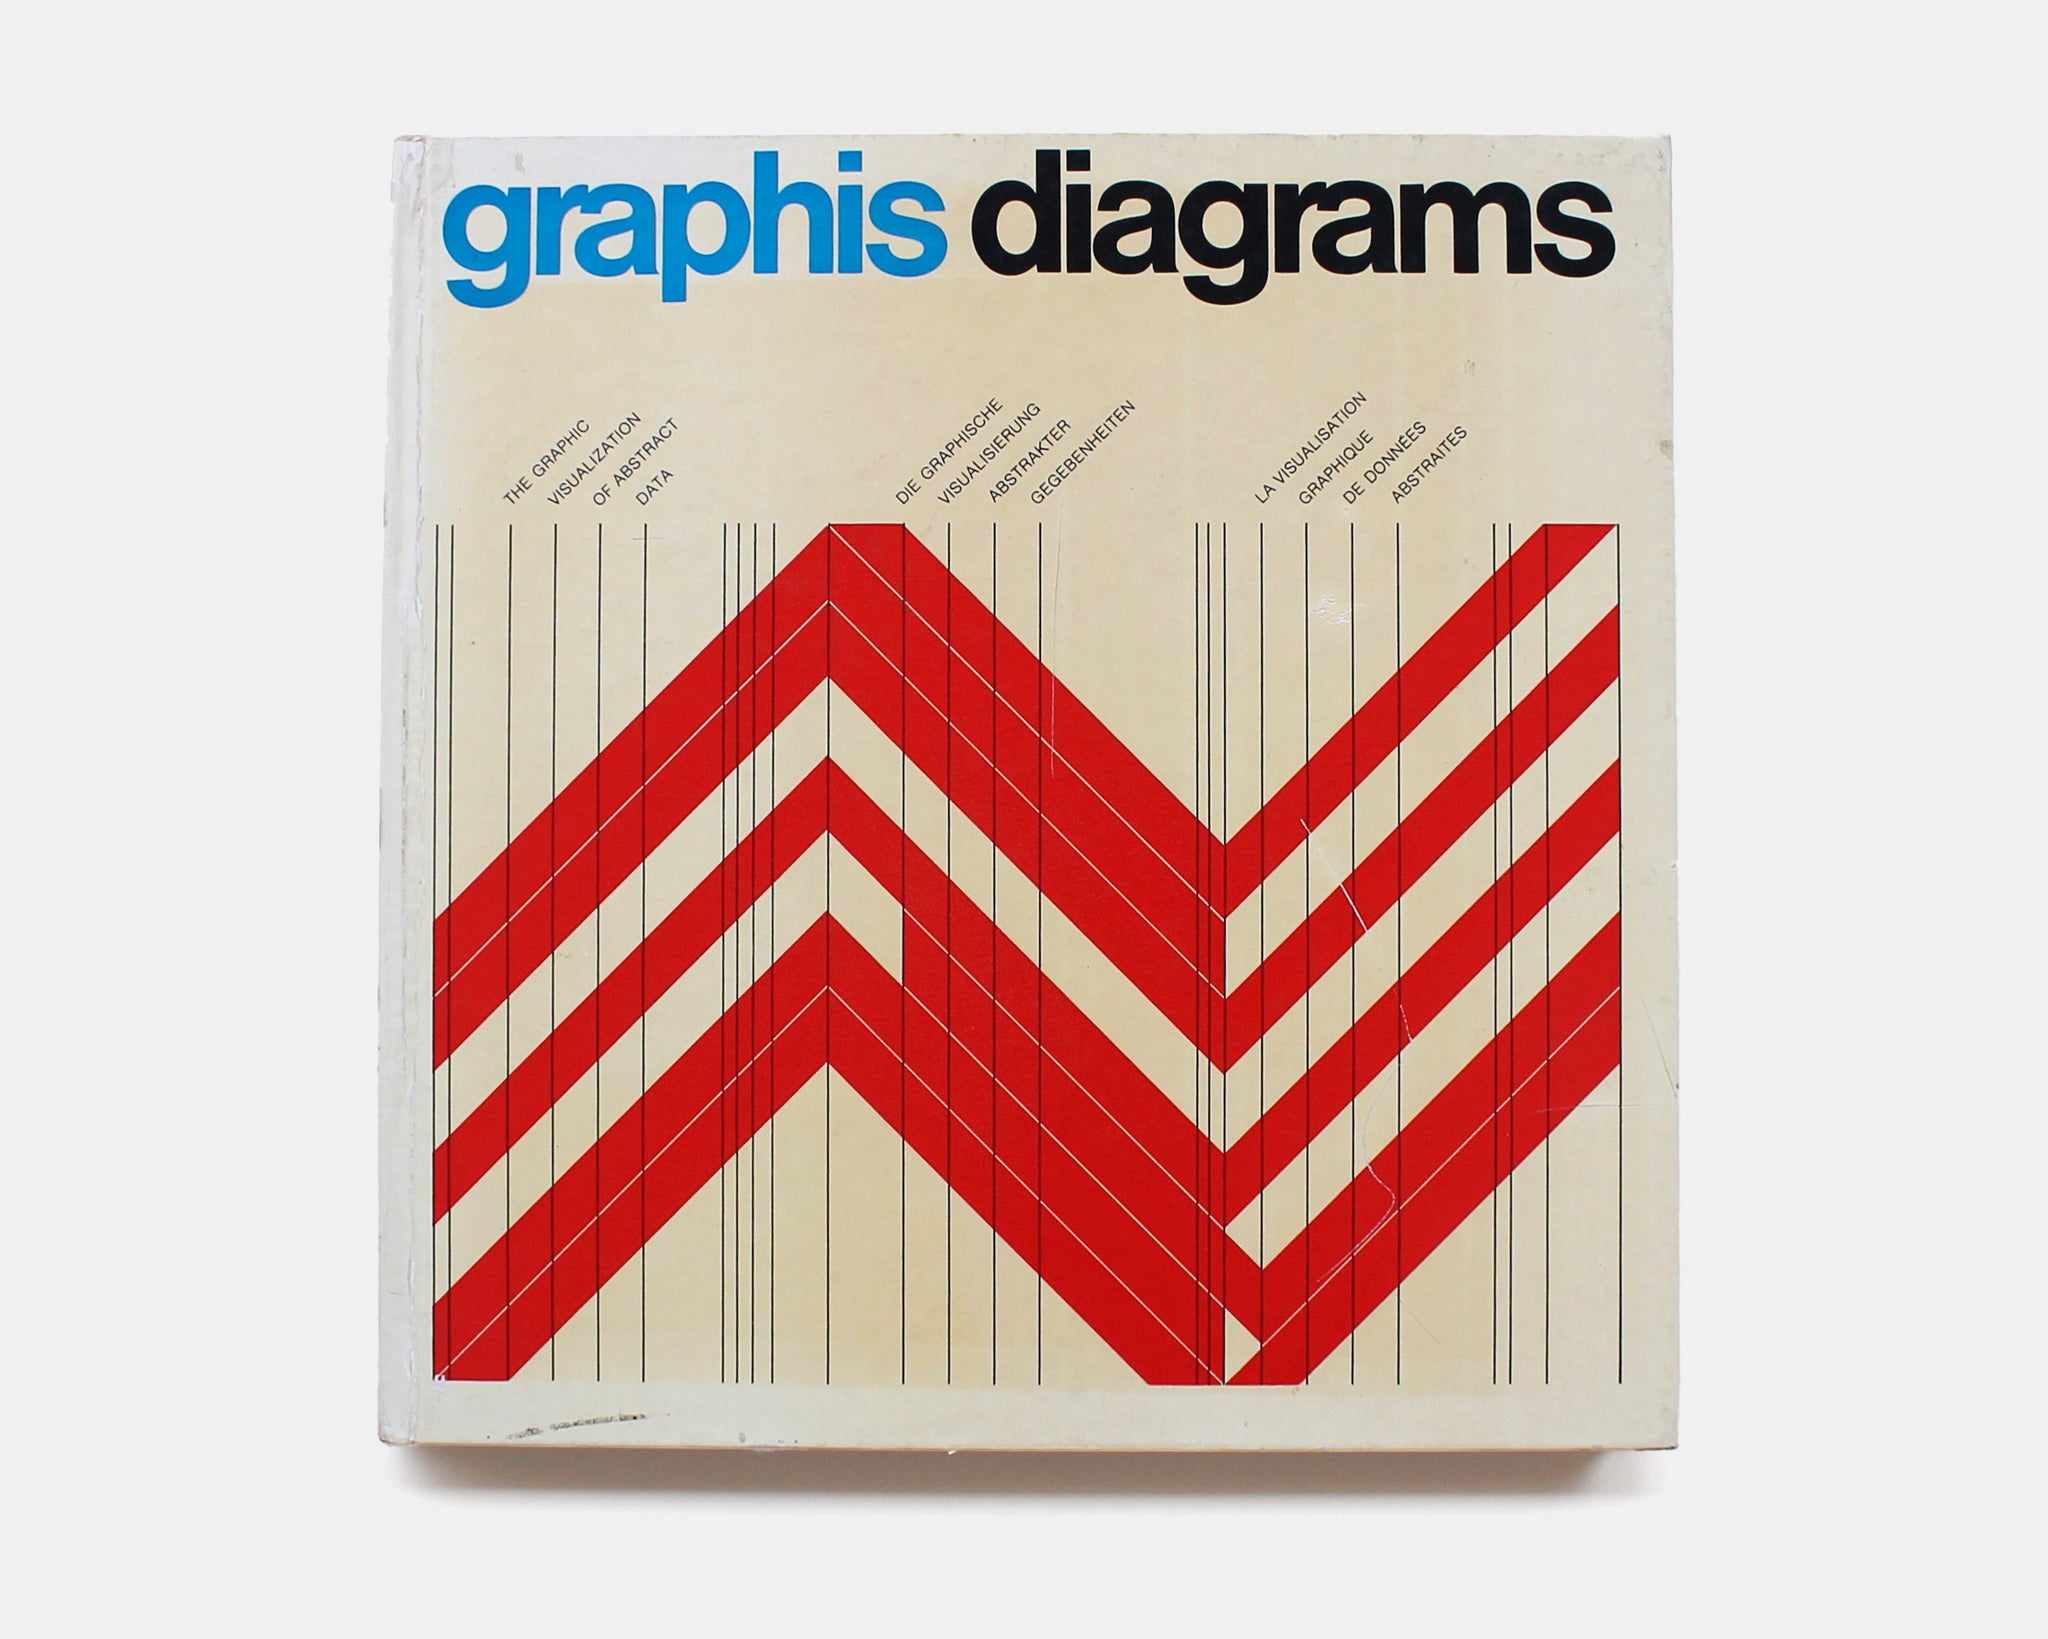 Graphis Diagrams The Graphic Visualization Of Abstract Data Display Graphic Design Collection